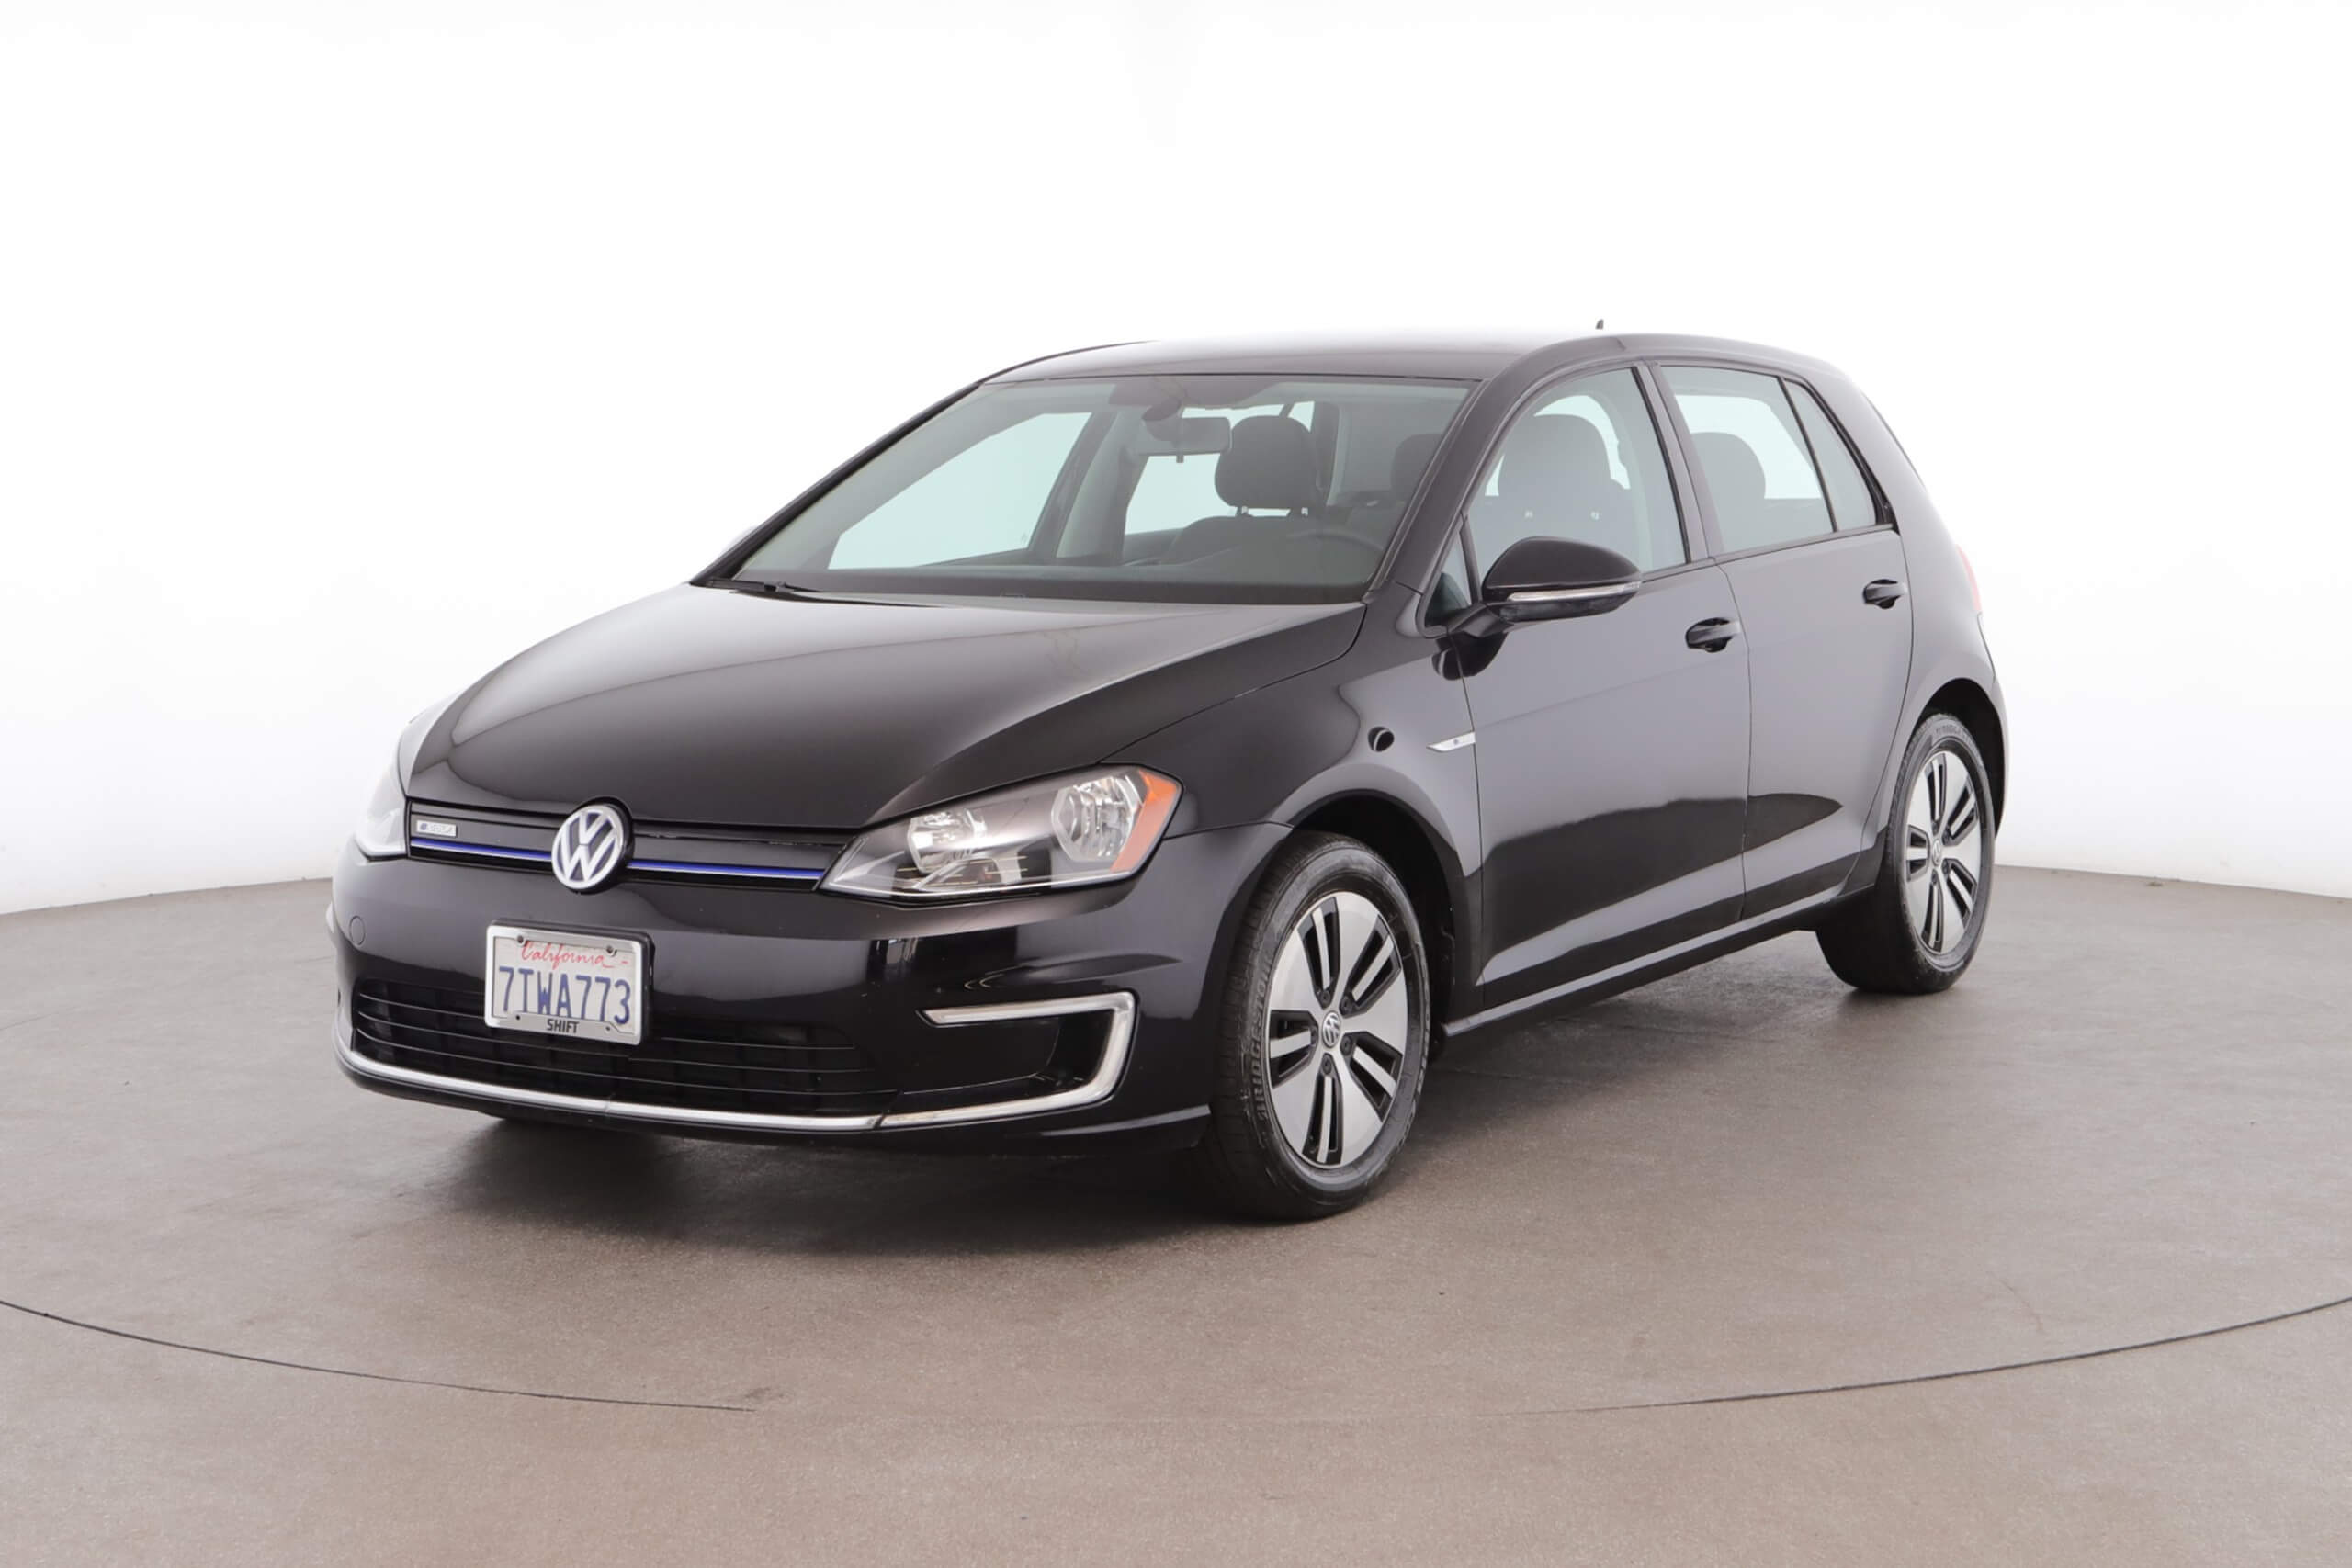 Volkswagen e-Golf Review: Best Used Electric Car to Buy? | Shift